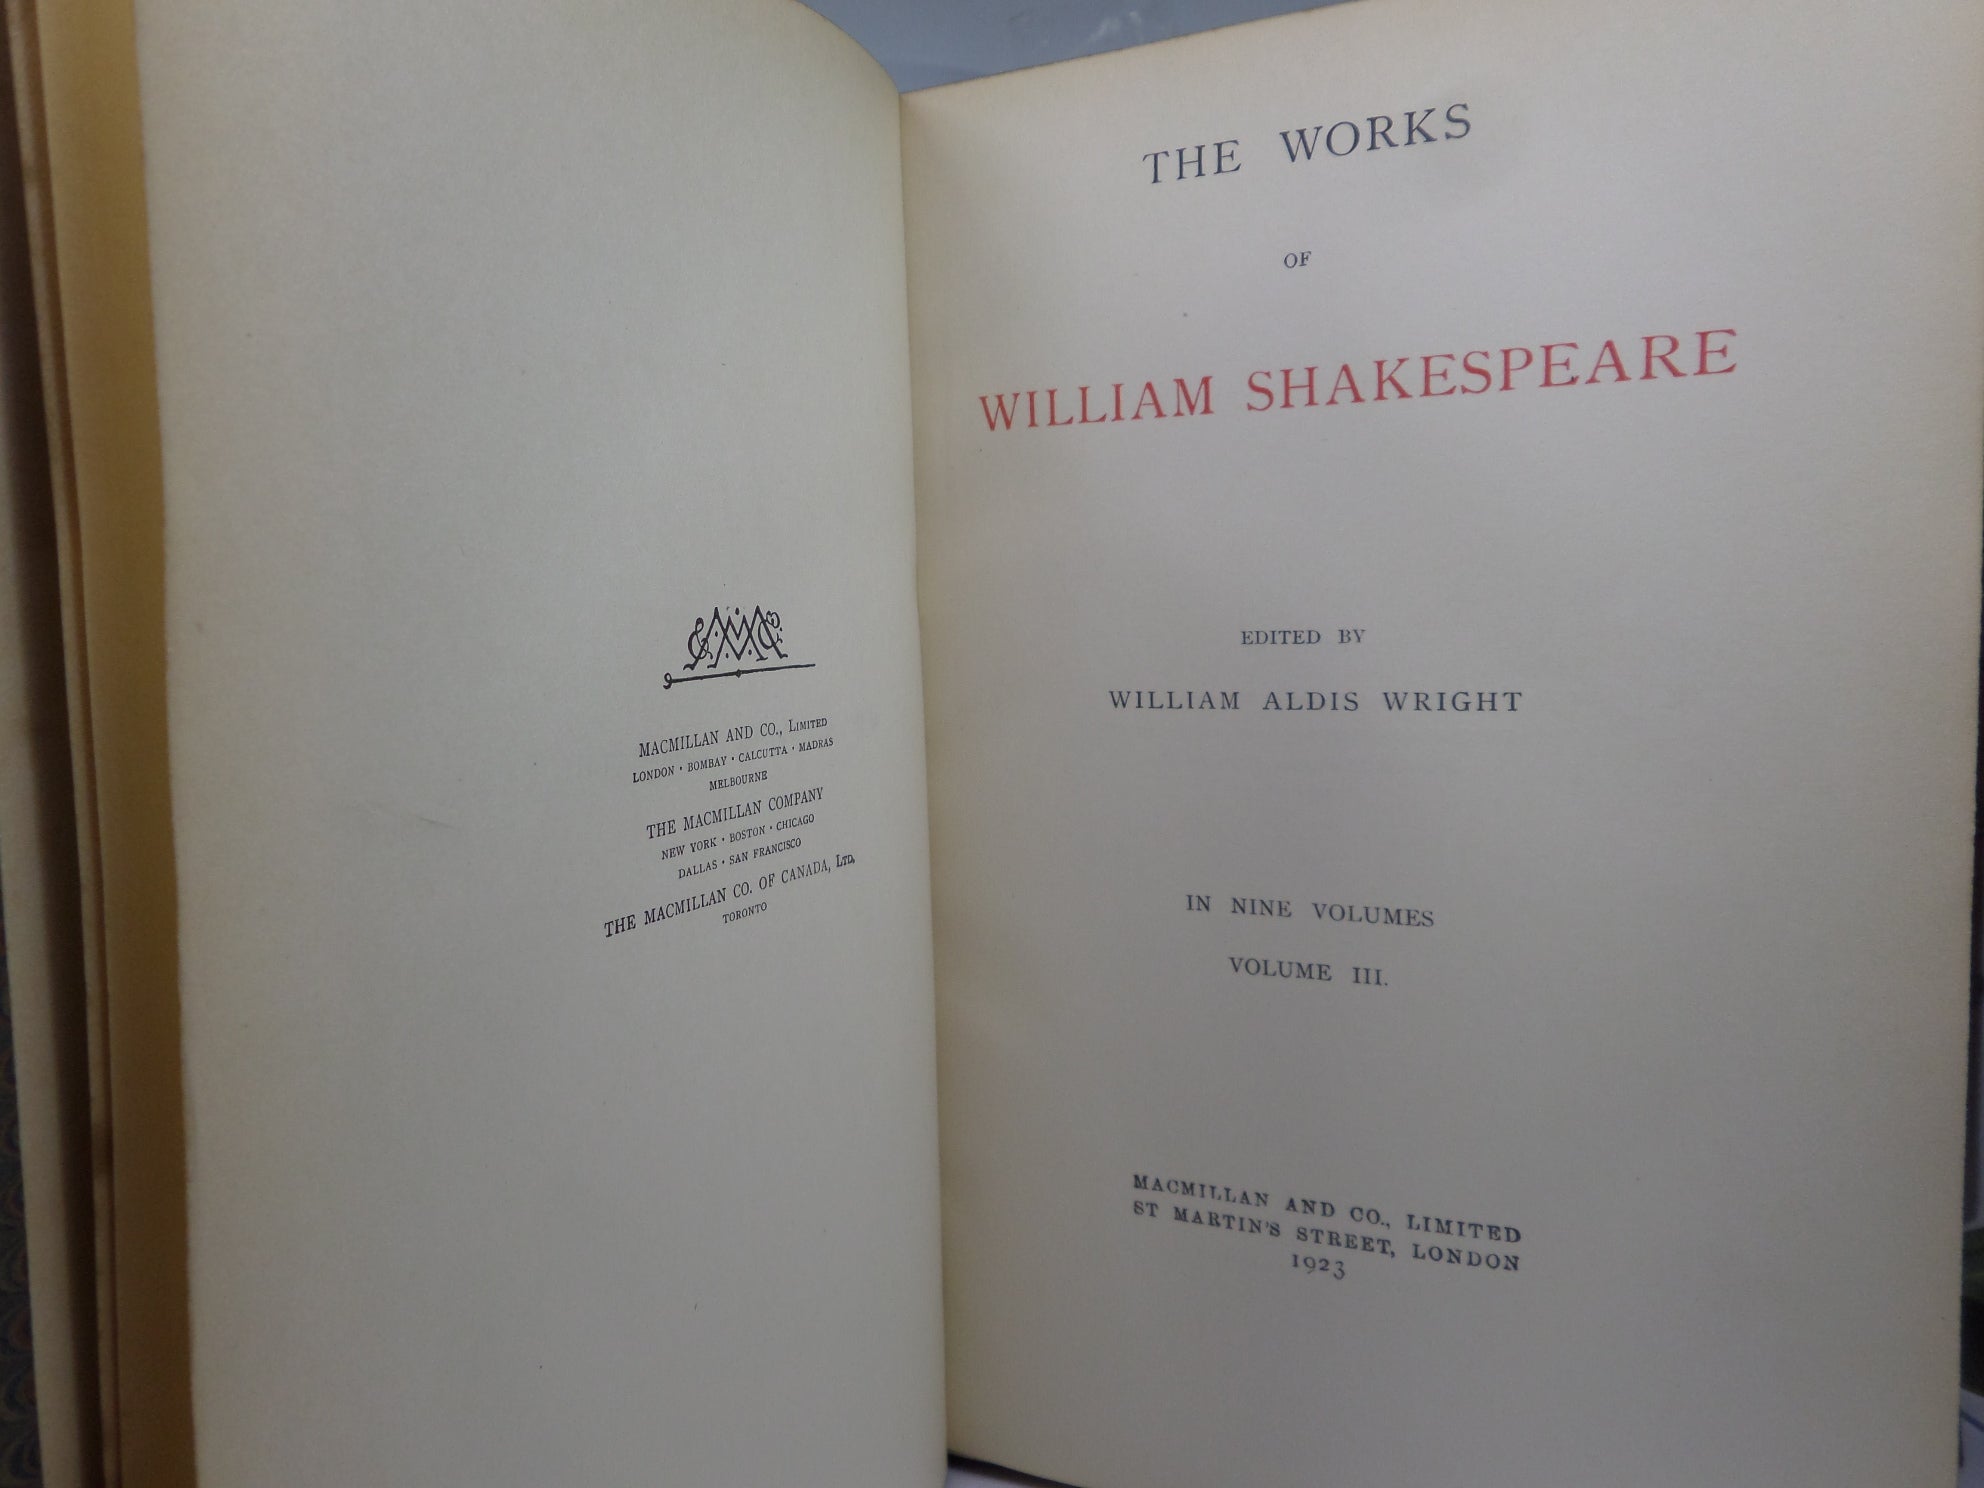 THE WORKS OF WILLIAM SHAKESPEARE 1905-1924 "CAMBRIDGE SHAKESPEARE" LEATHER-BOUND BY BUMPUS